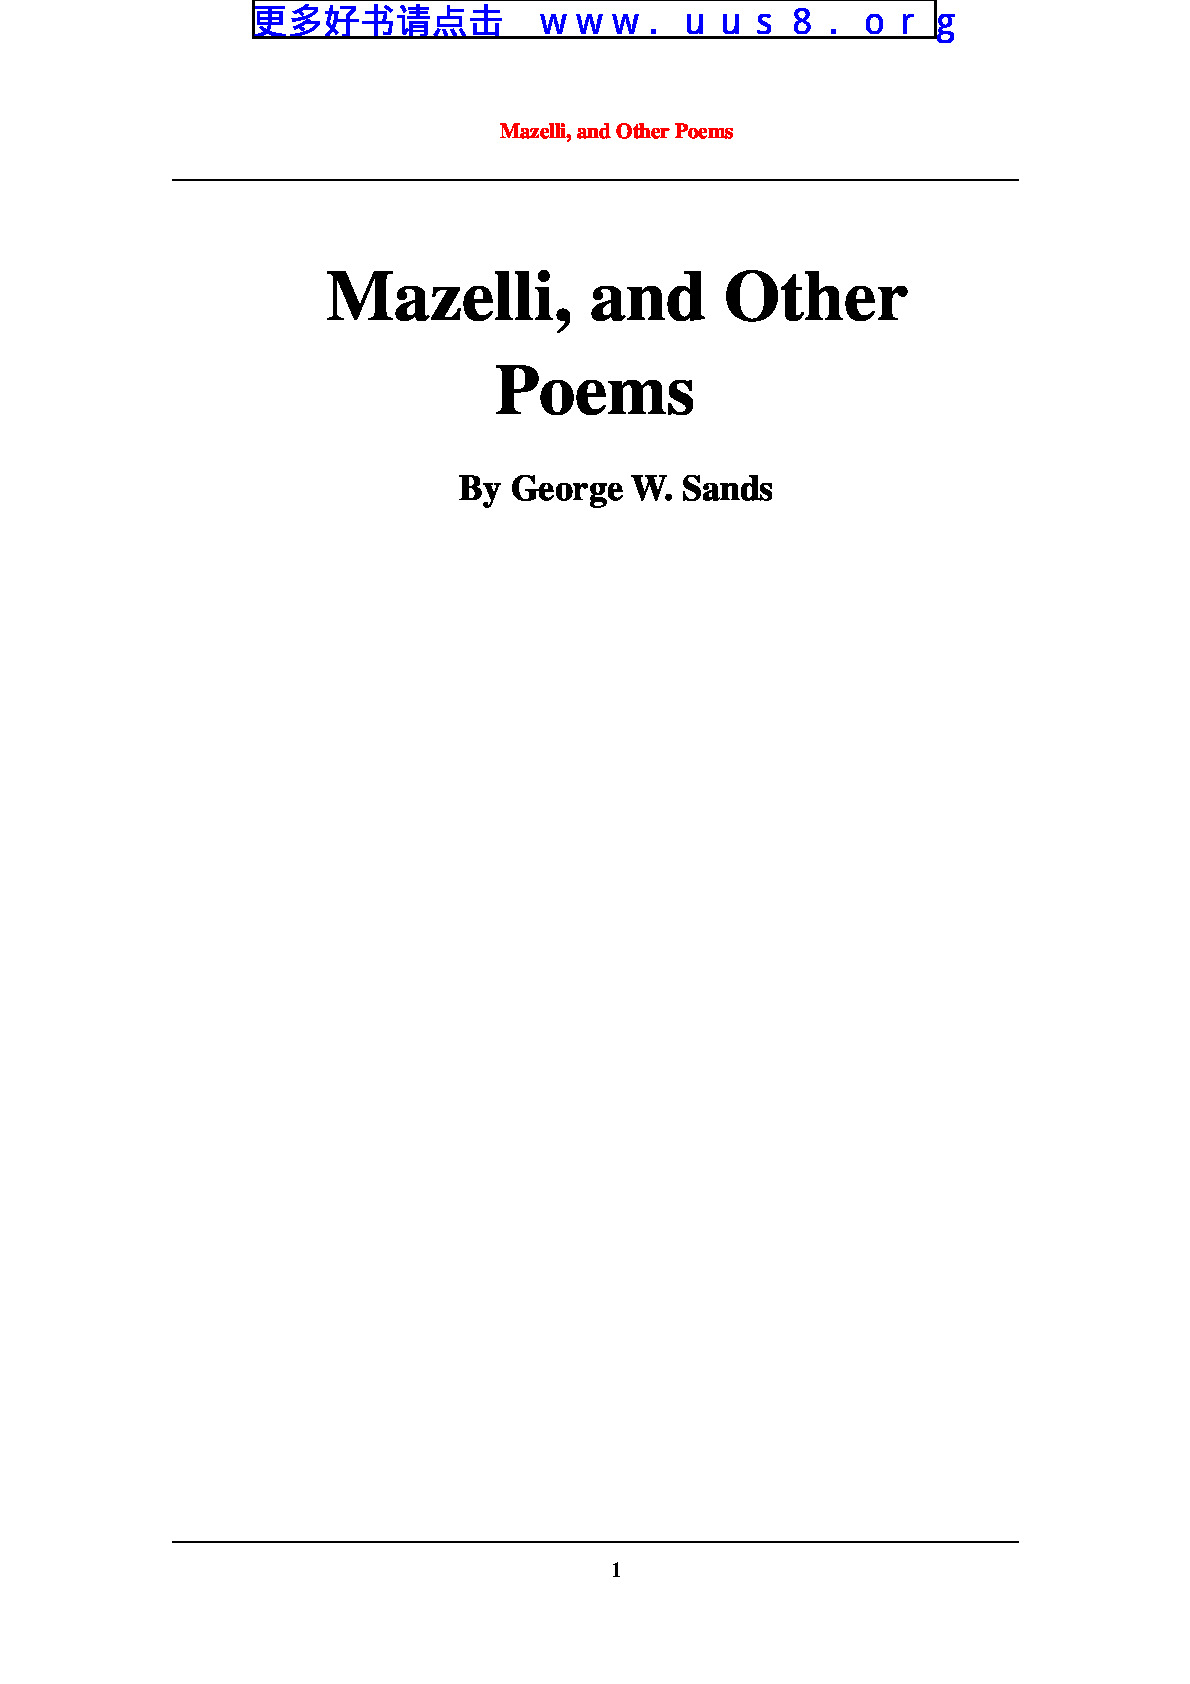 Mazelli__and_Other_Poems(马兹里)